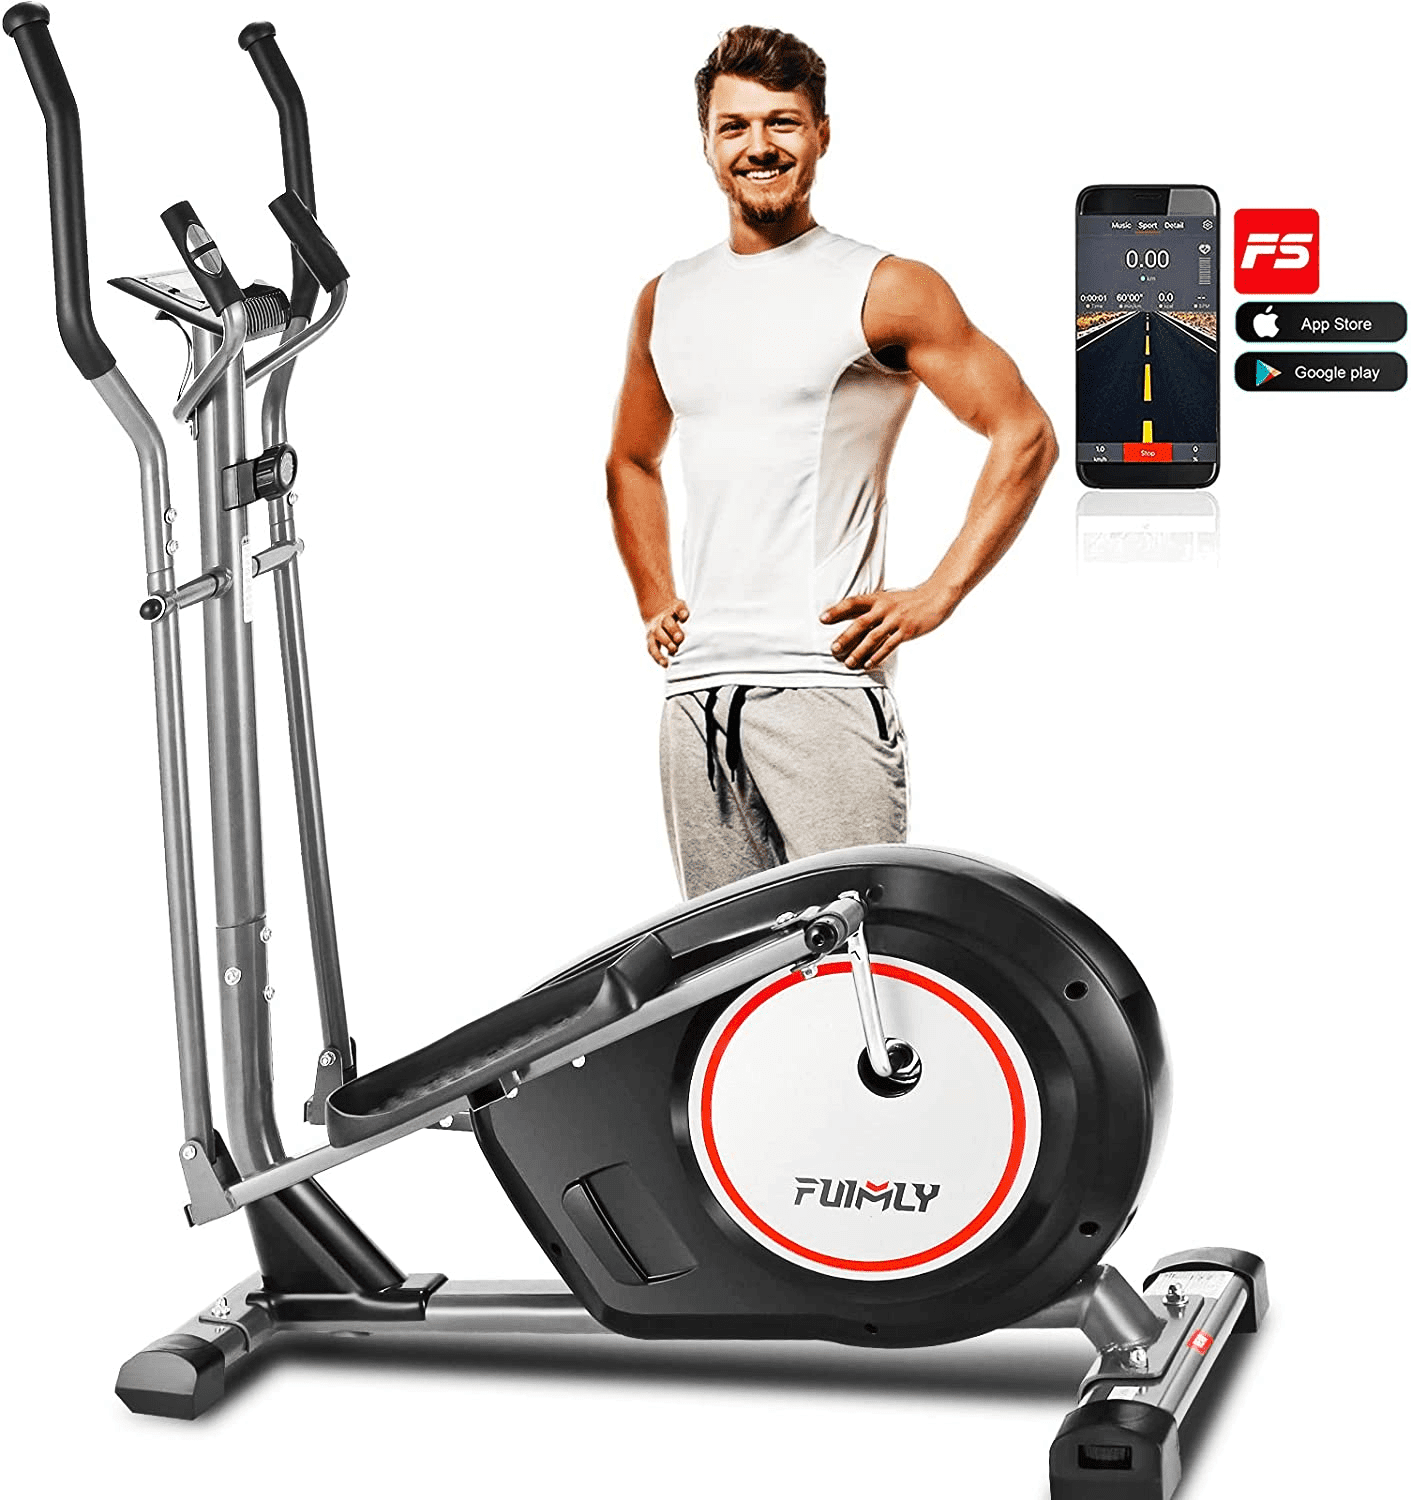 ANCHEER APP Elliptical Machine APP & 390lbs Weight Capacity for Home Gym Elliptical Trainer with 10/16 Levels of Magnetic Resistence Levels Heart Rate Sensor Enhanced LCD Monitor 